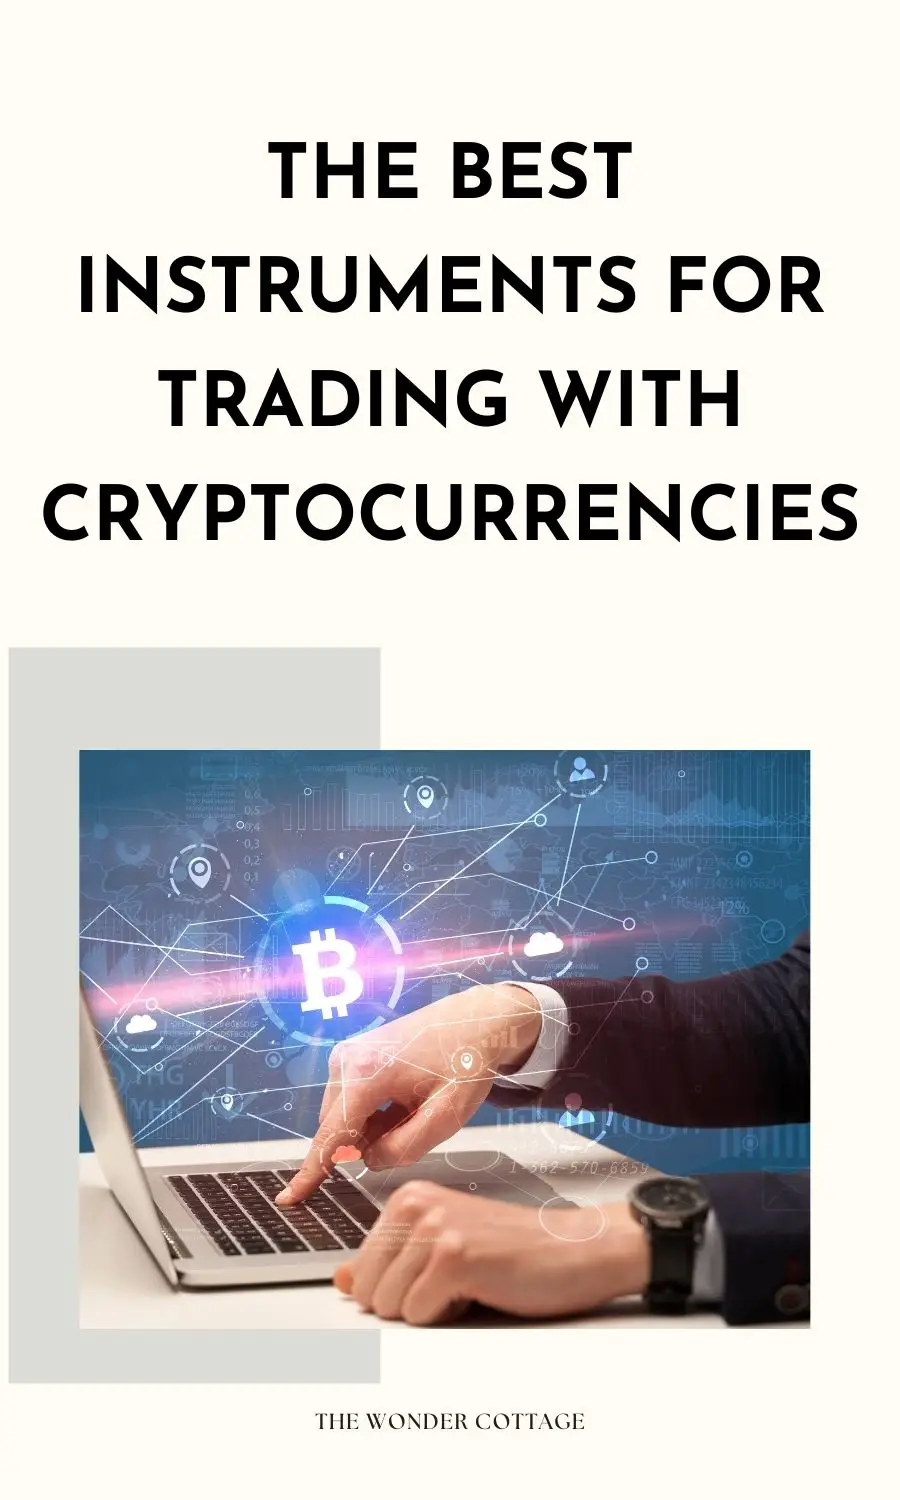 The Best Instruments For Trading With Cryptocurrencies